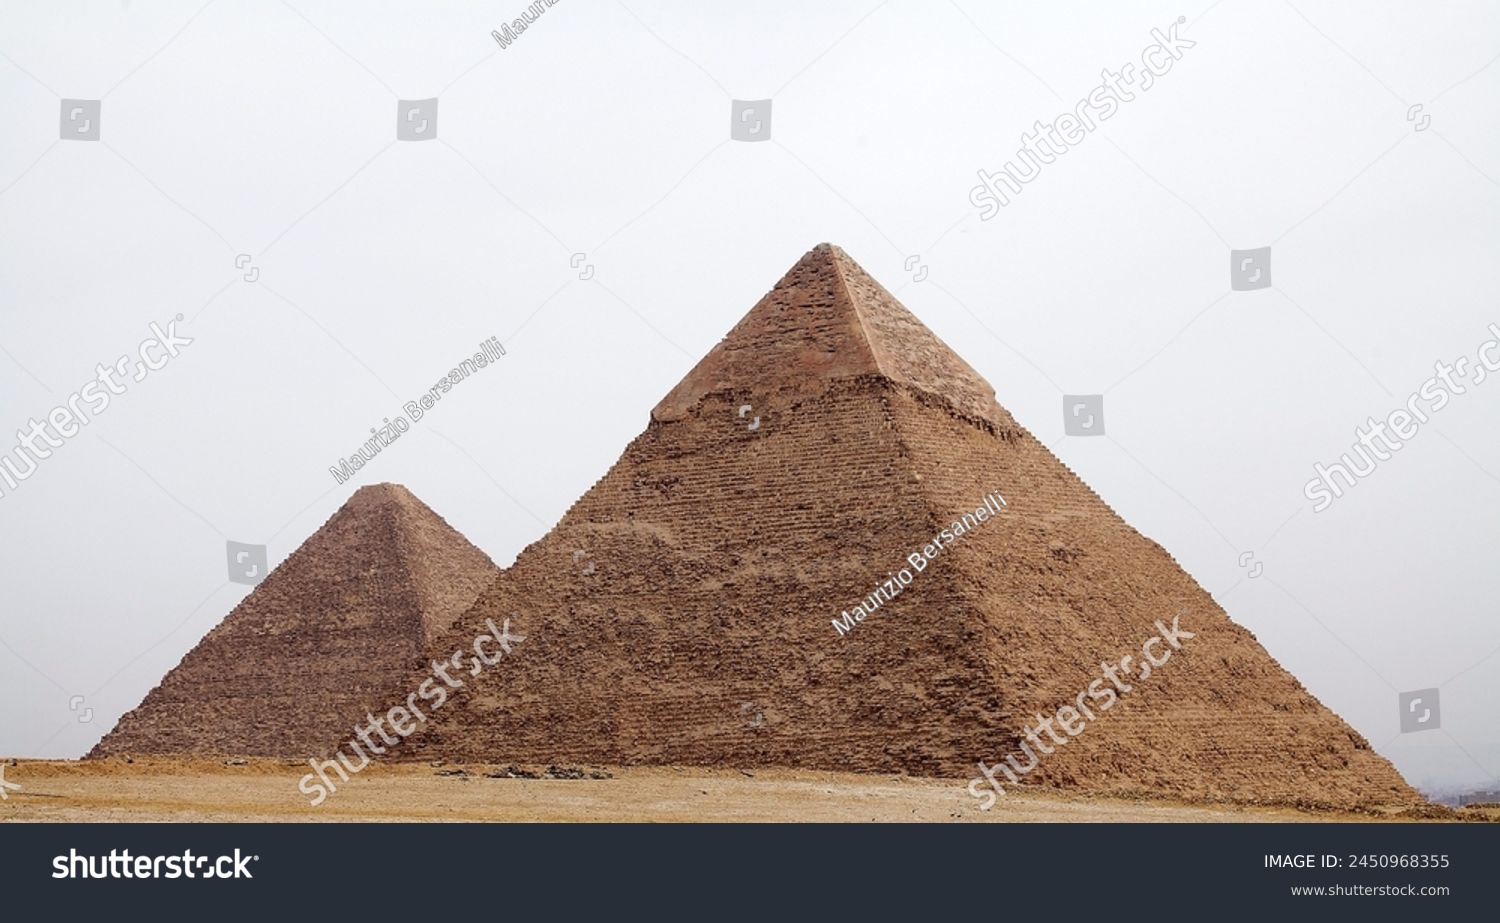 The Great Pyramid and Pyramid of Khefre at the Giza Pyramid Complex in Giza, Egypt, also called the Giza Necropolis. It was built during the Fourth Dynasty of the Old Kingdom #2450968355